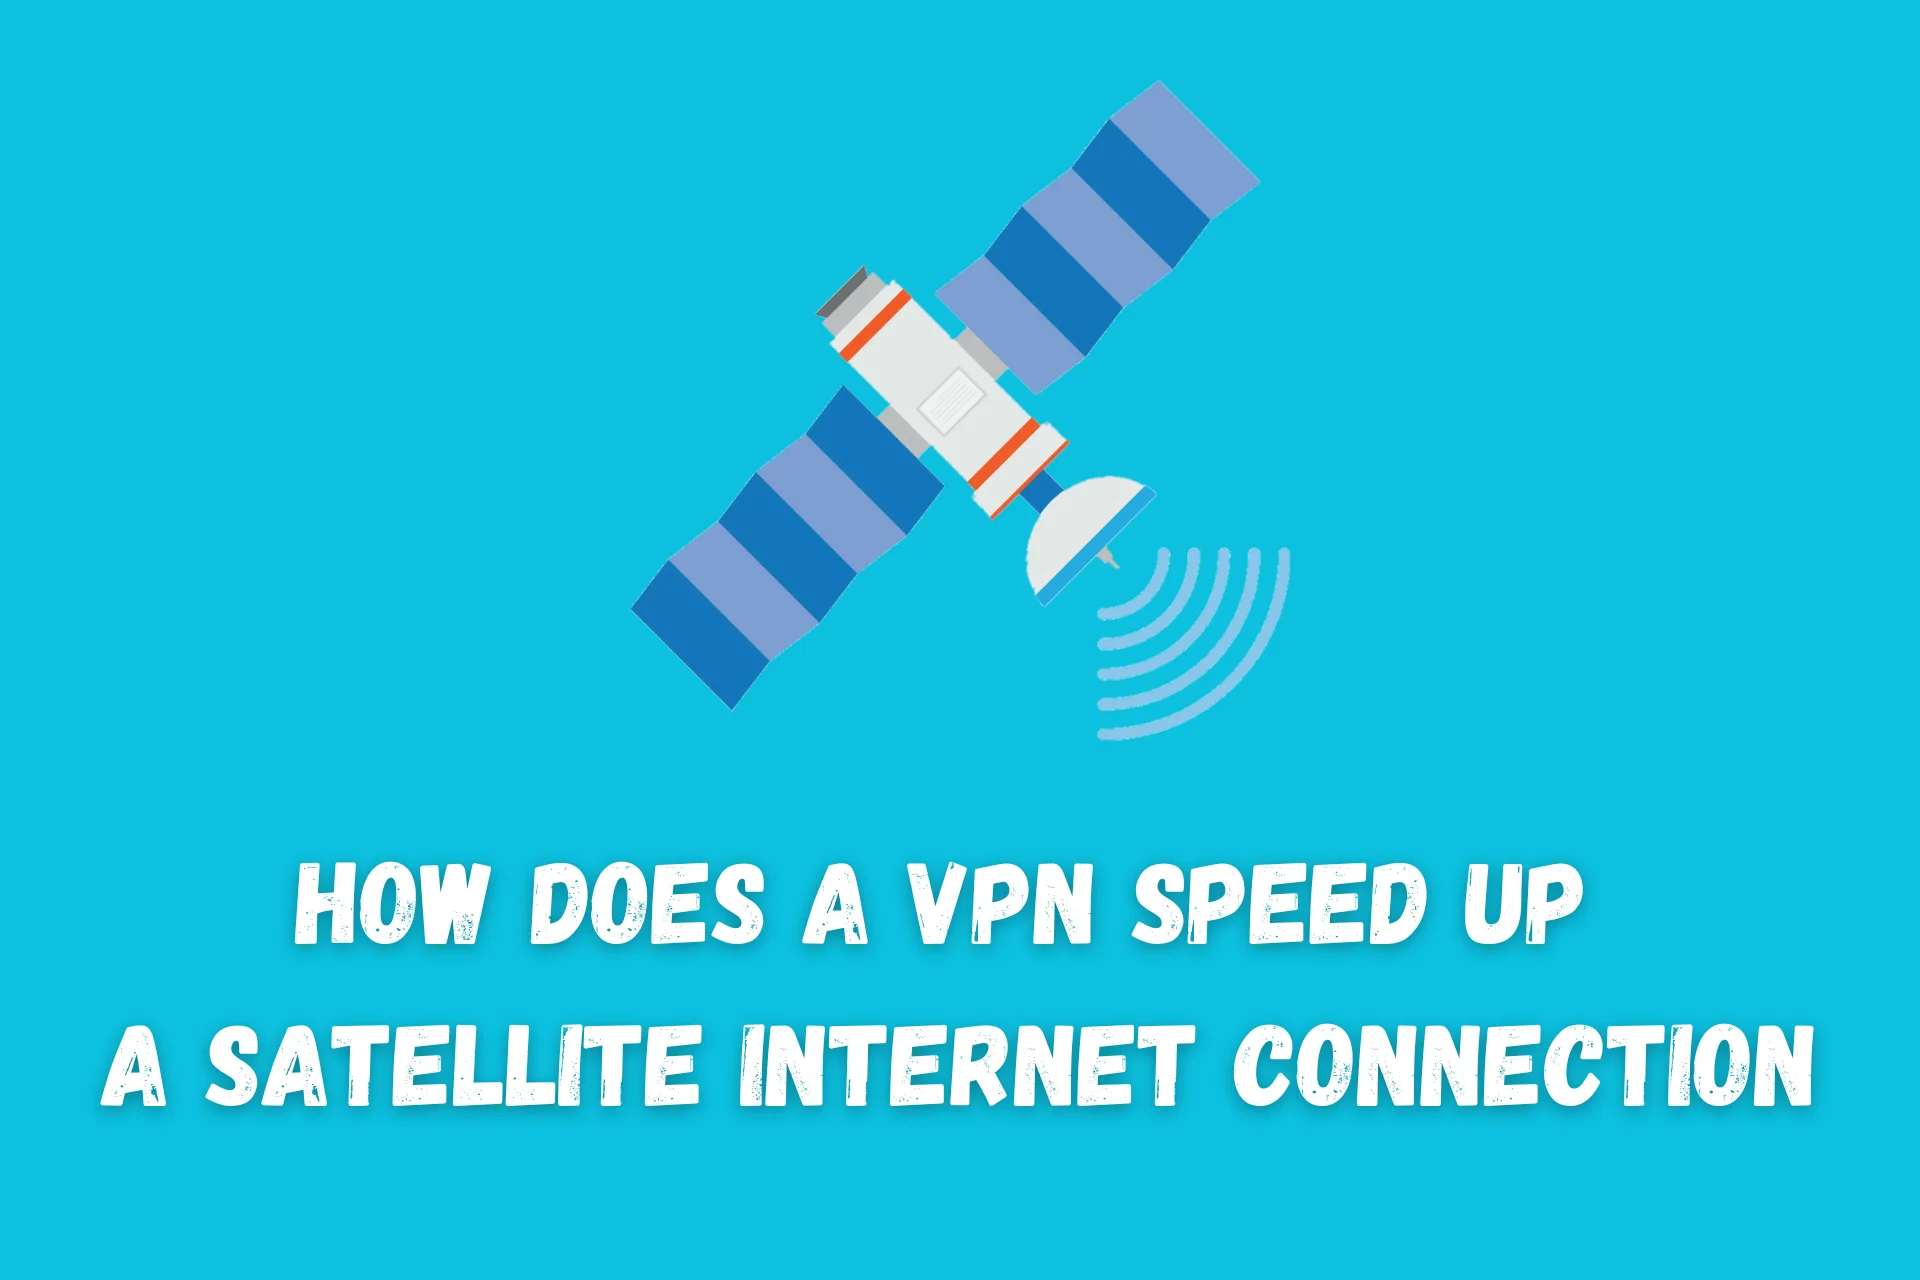 How Does A VPN Speed Up A Satellite Internet Connection